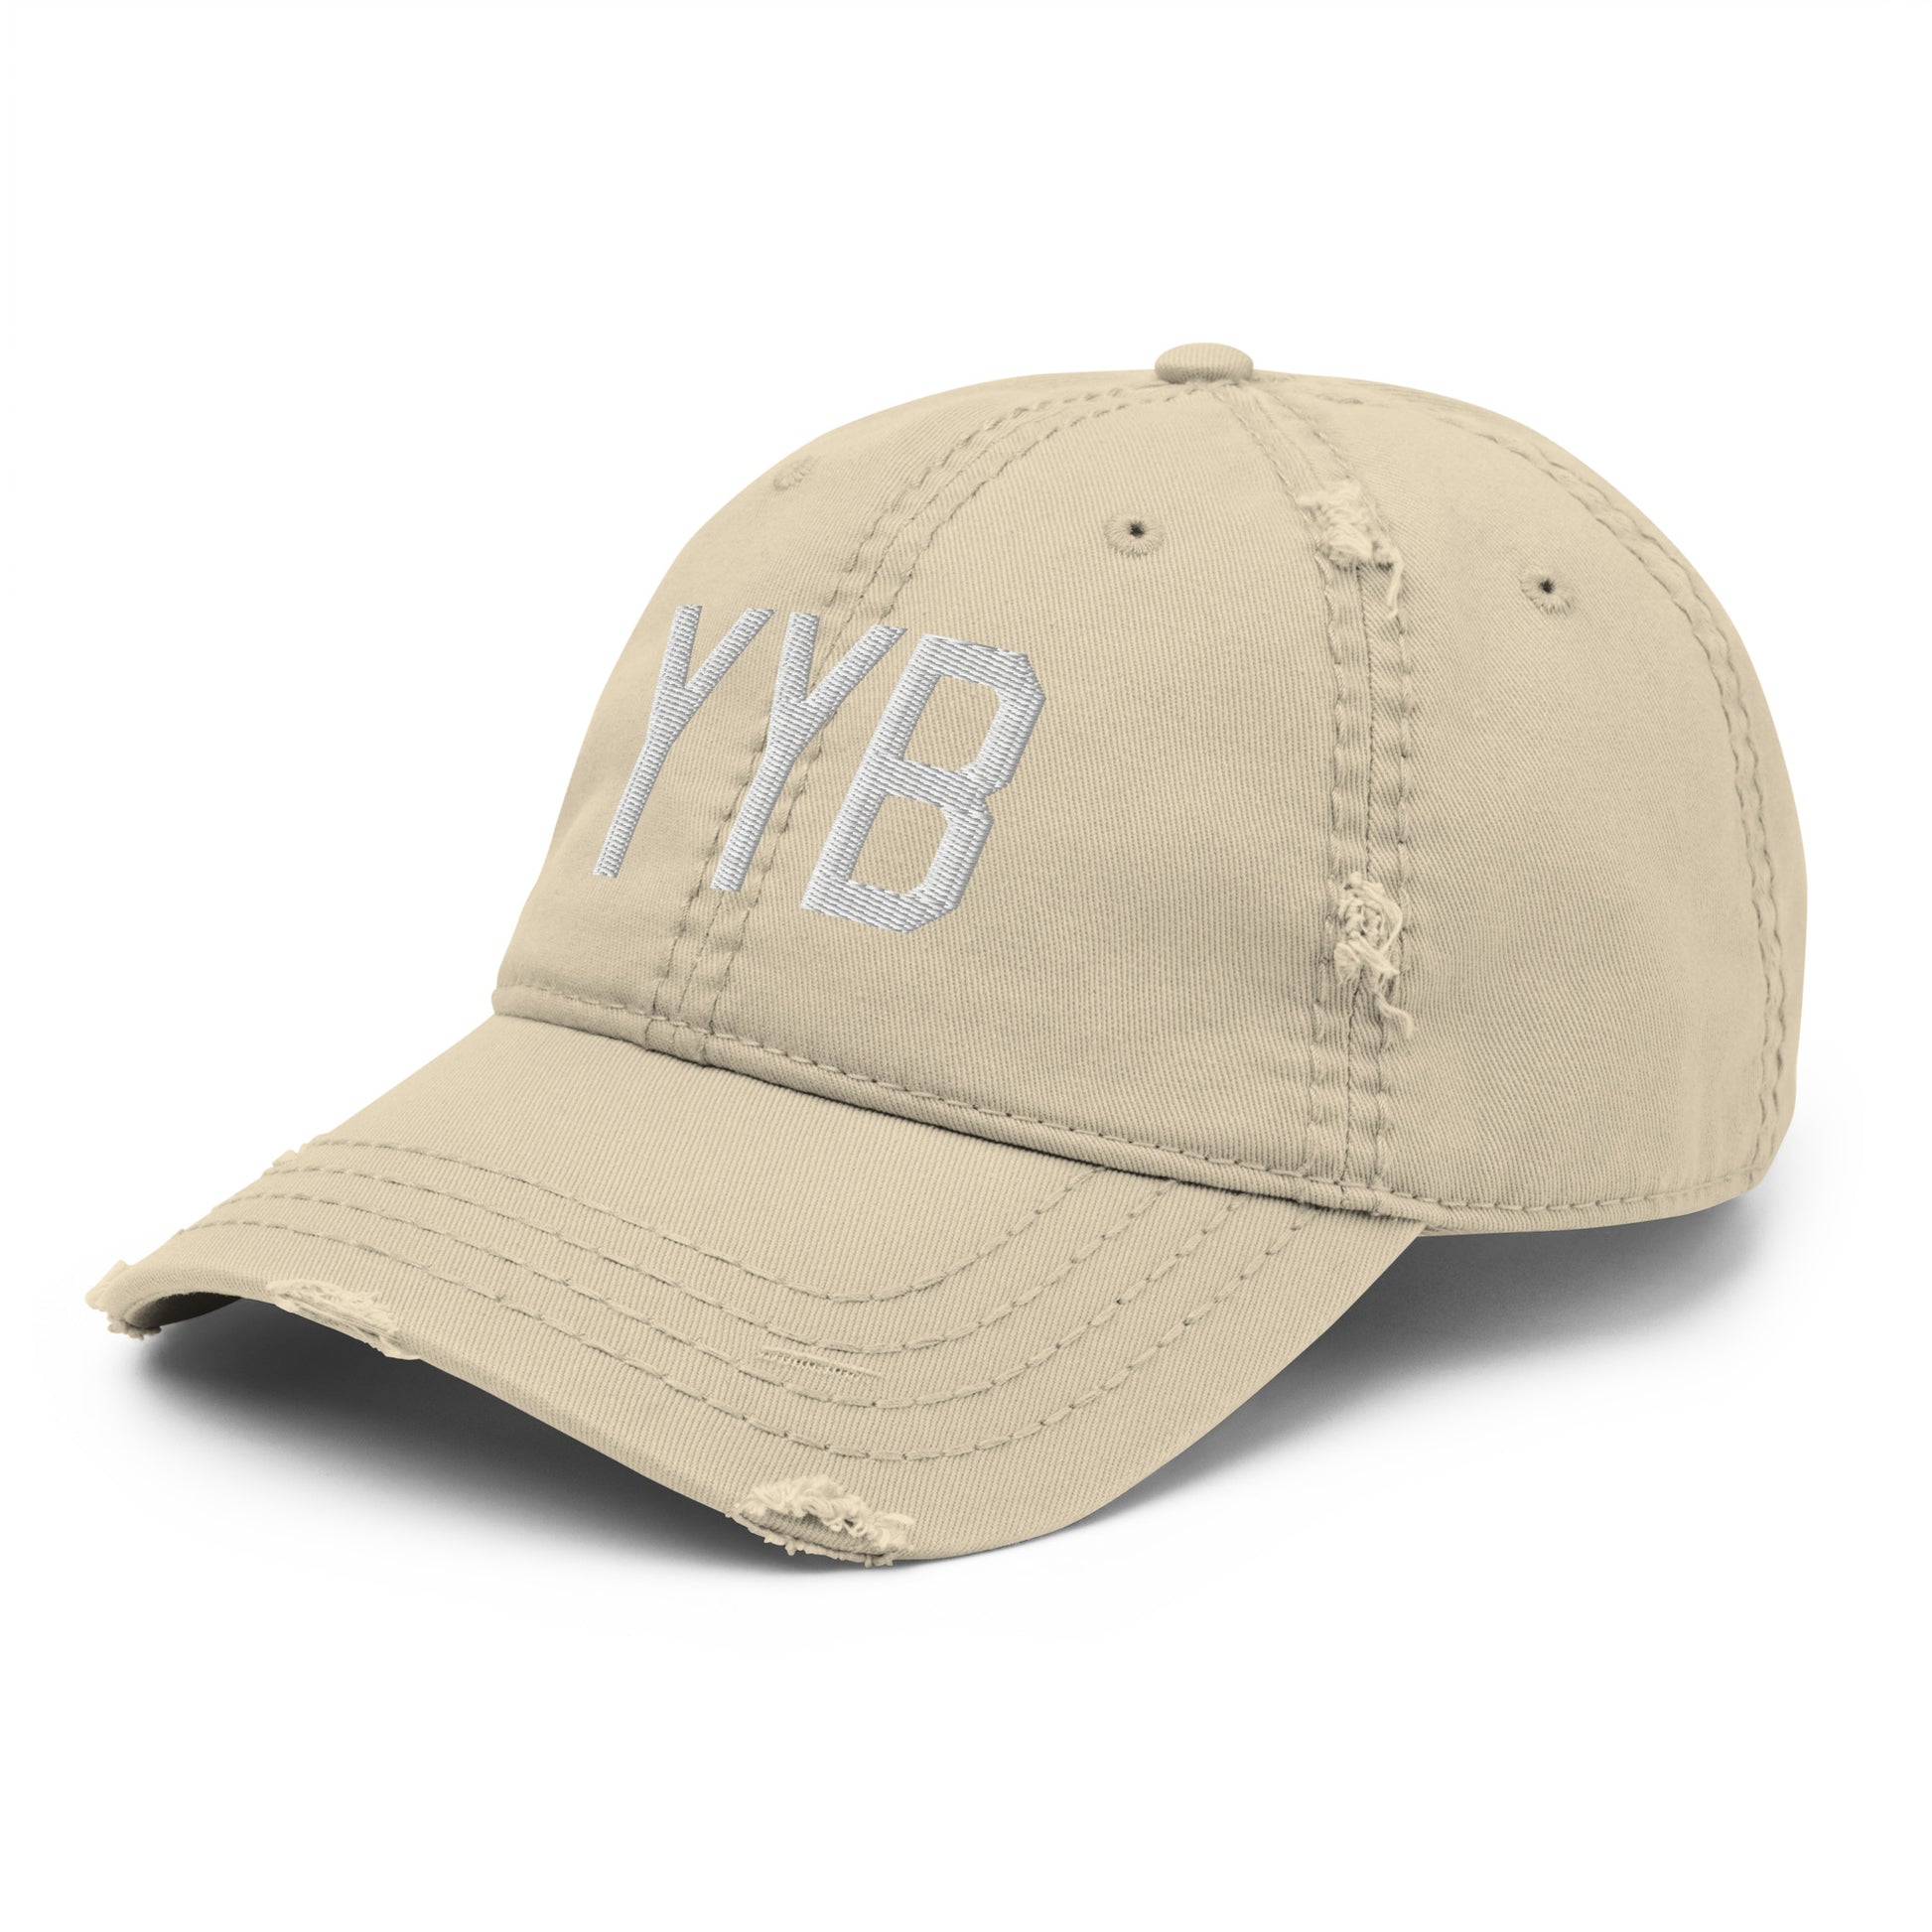 Airport Code Distressed Hat - White • YYB North Bay • YHM Designs - Image 19